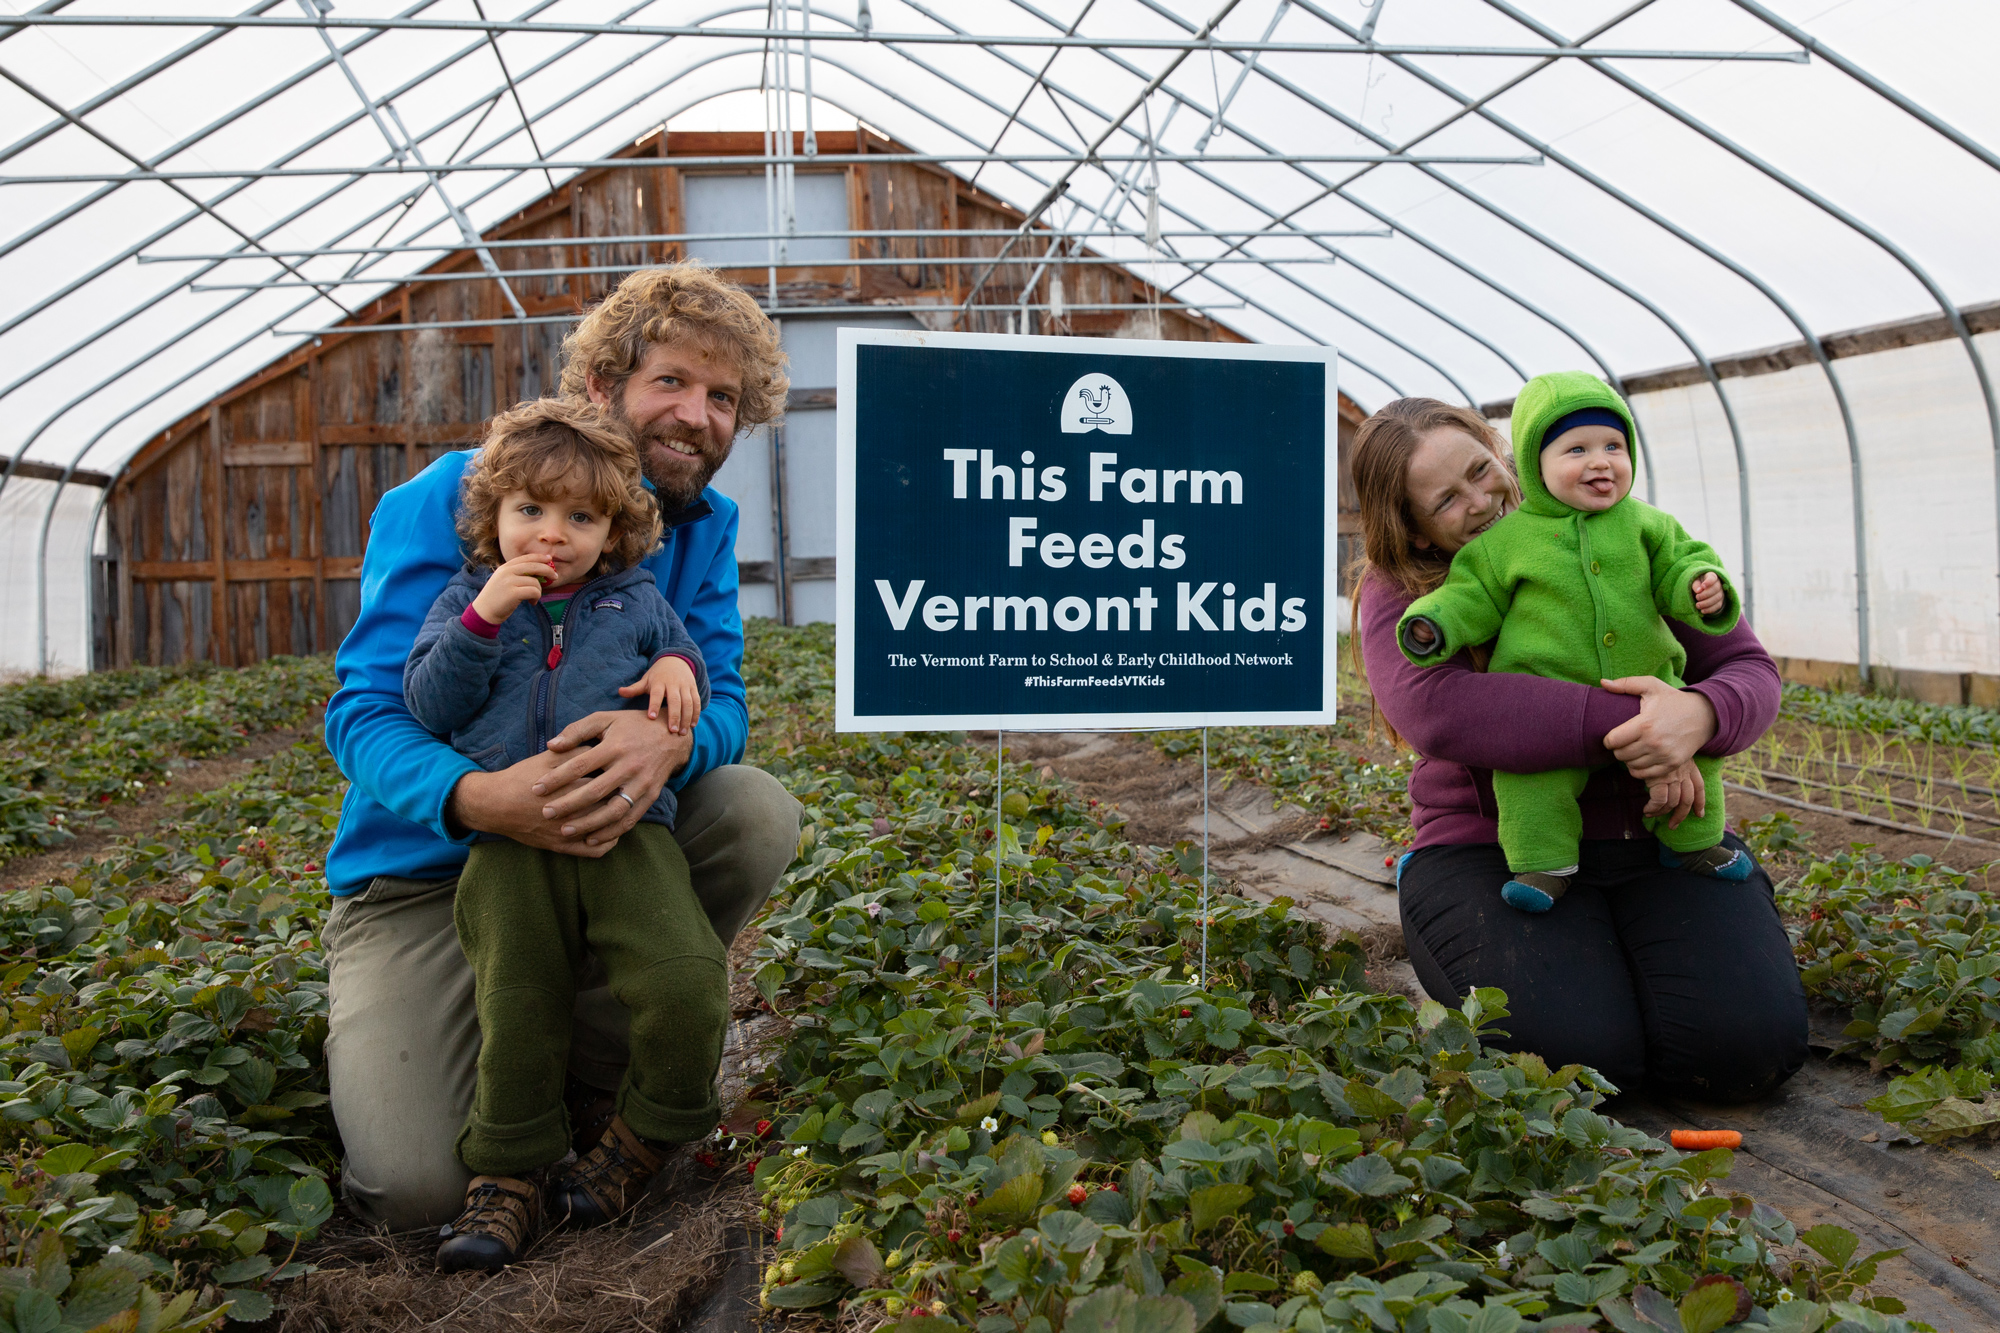 The Paradee Family of Long Winter Farm (Stowe, VT) proudly displays a "This Farm Feeds Vermont Kids" lawn sign in a hoop house.